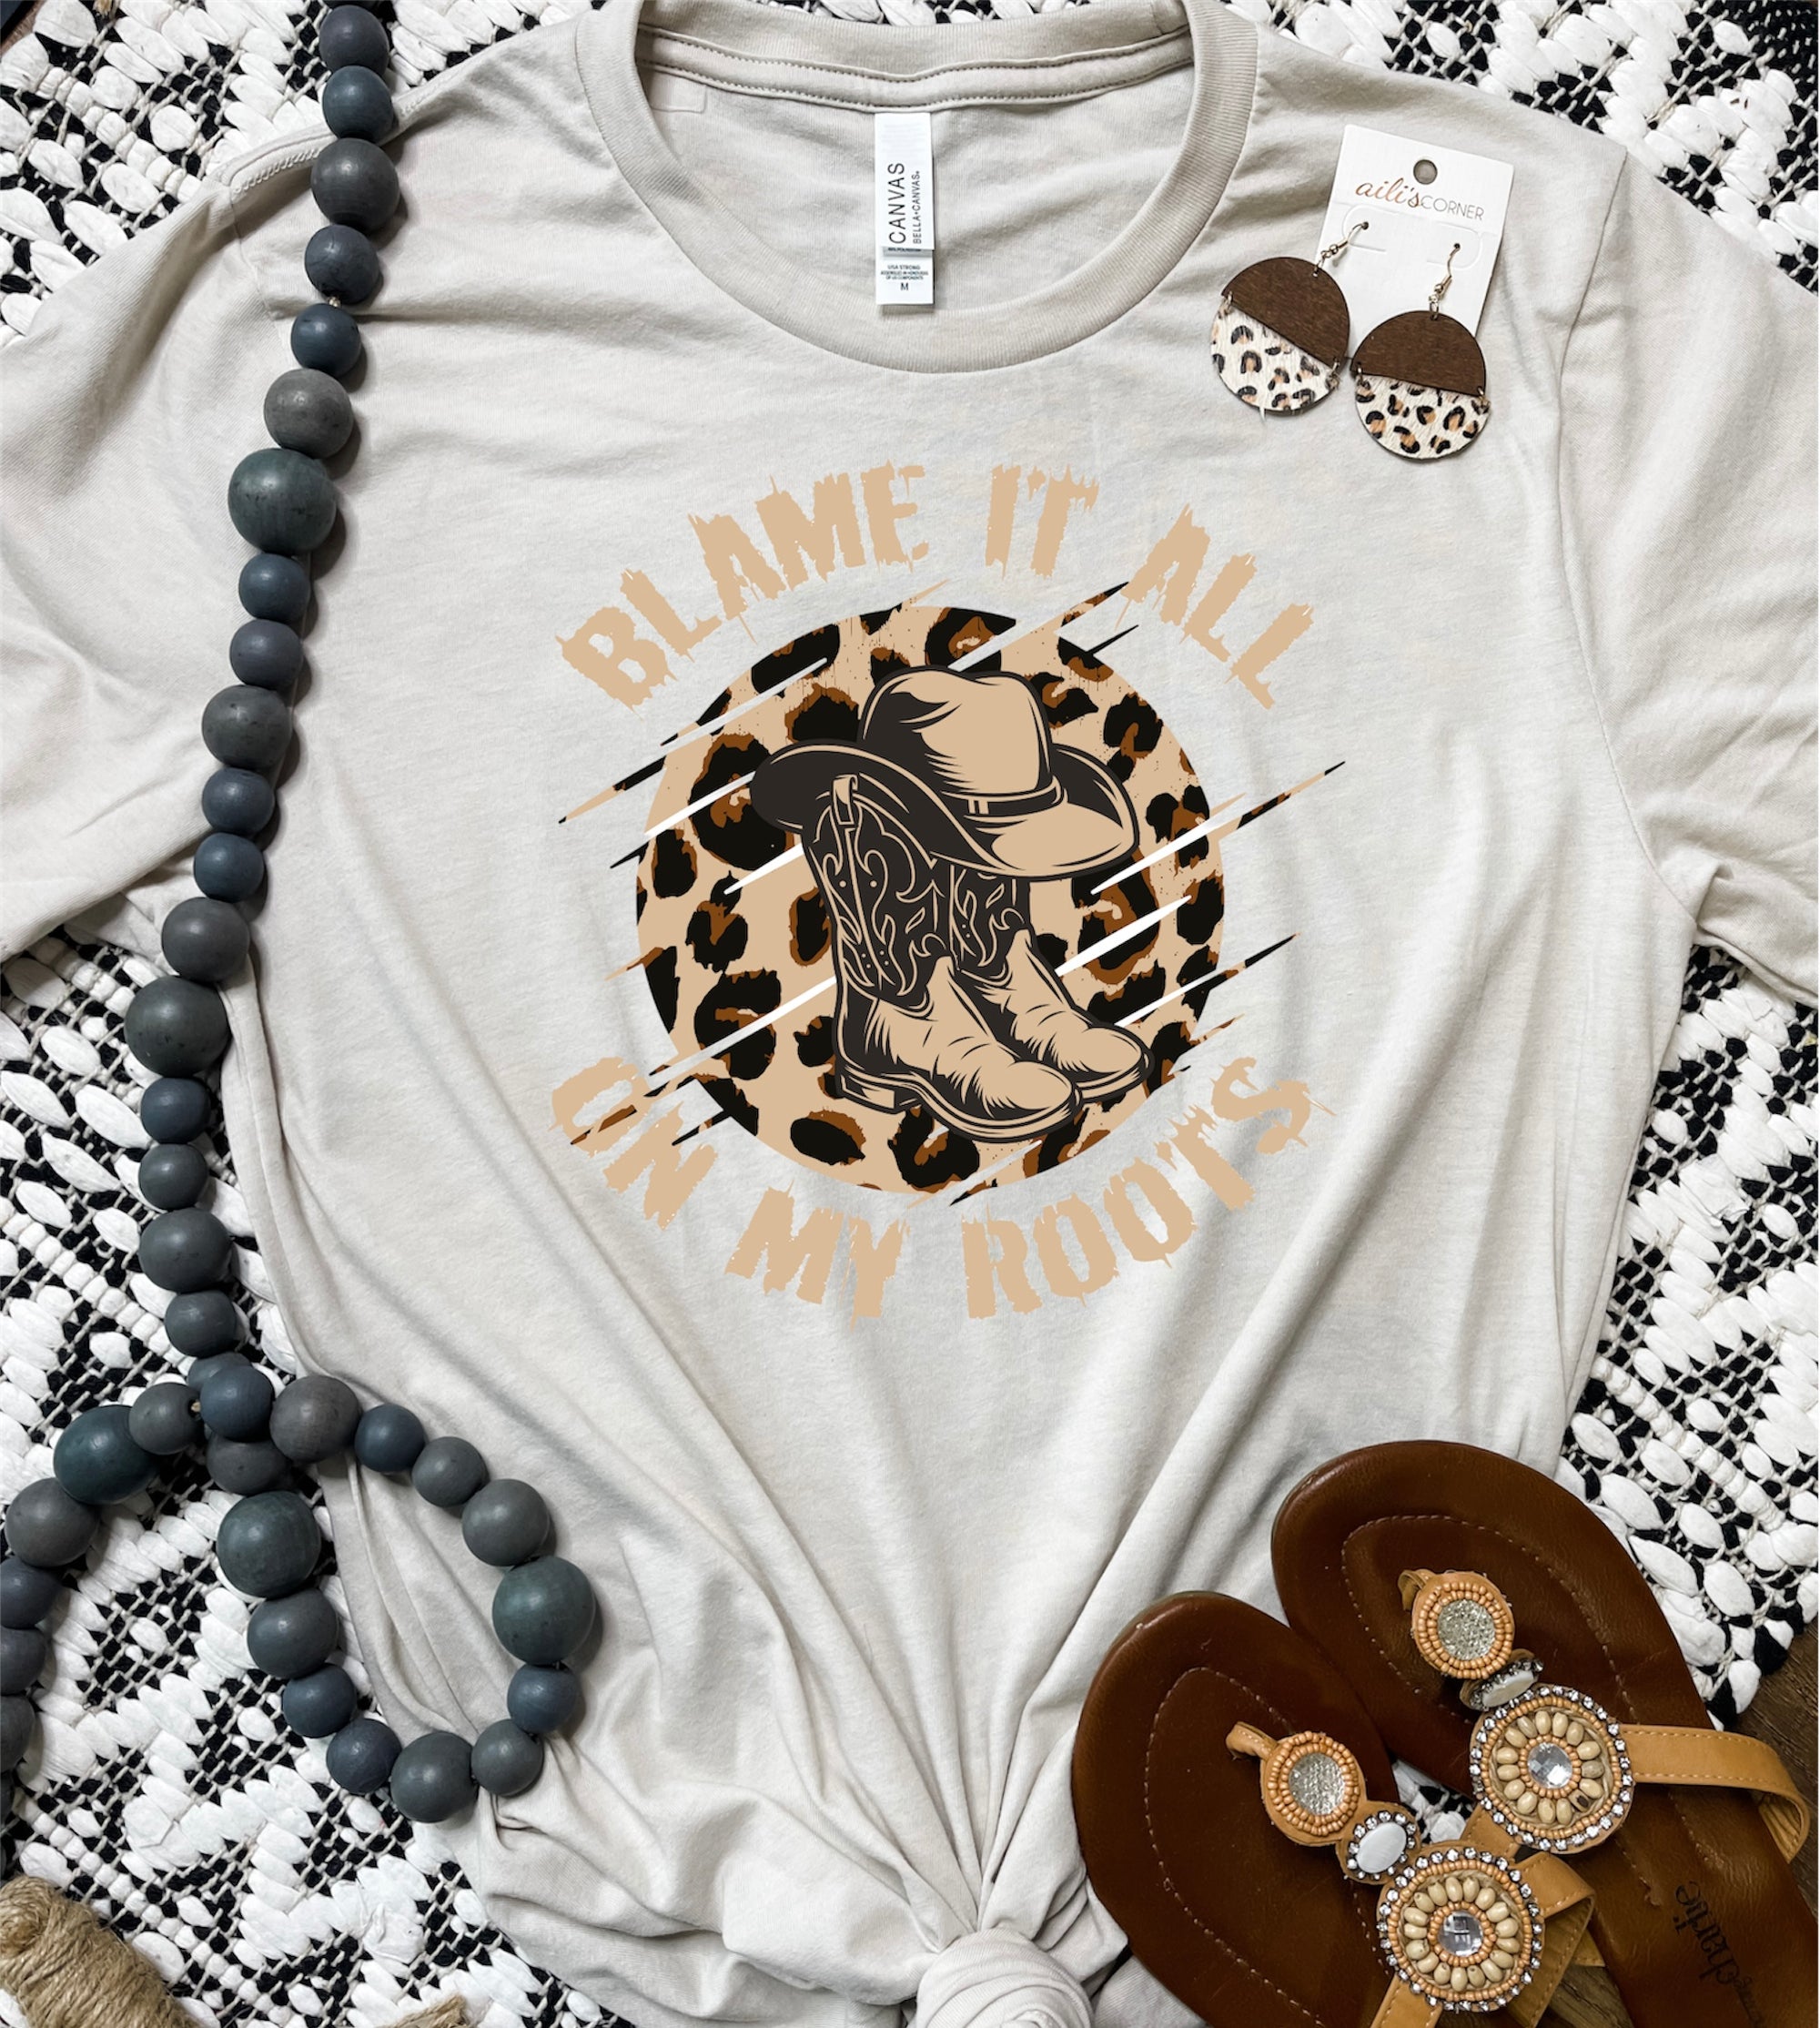 Blame It All On My Roots Tan Tee